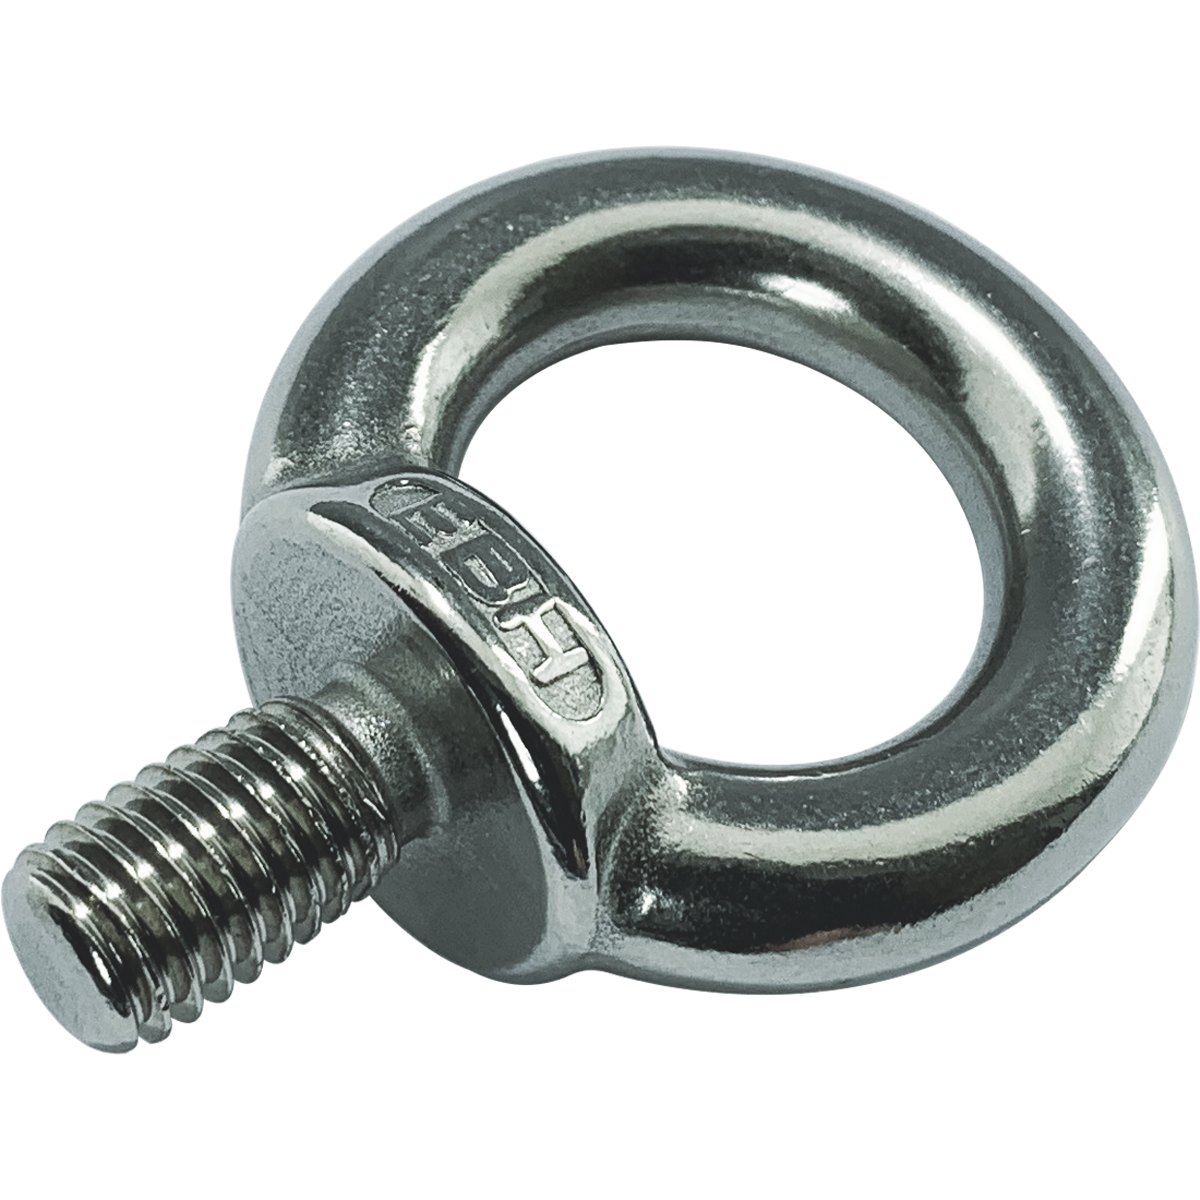 BZP lifting eye bolts. A thick circular ring of metal with a threaded section. 